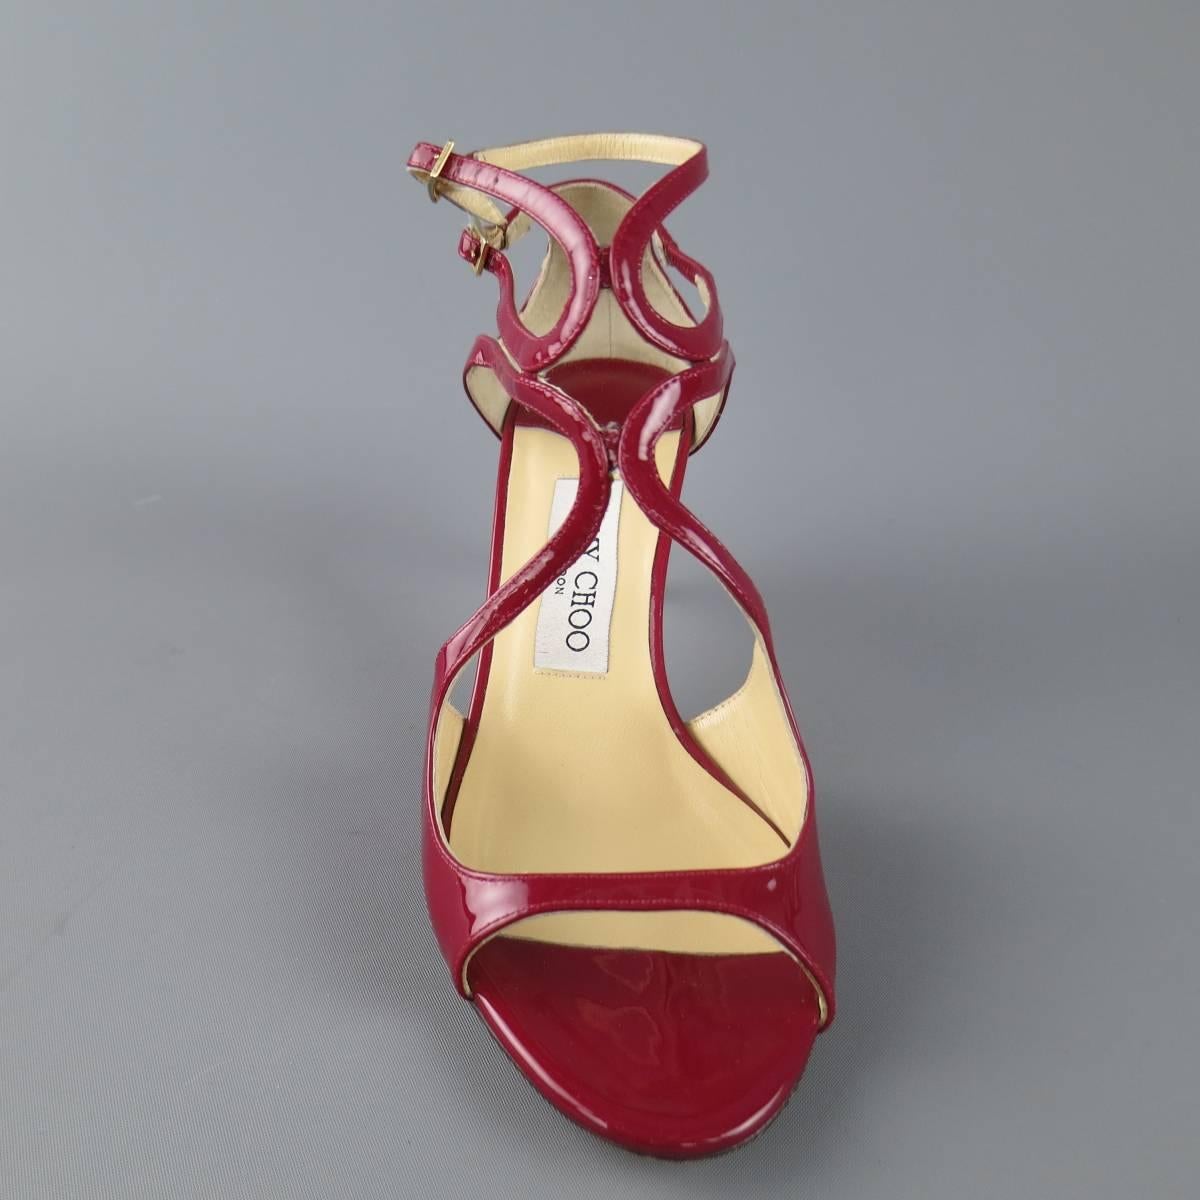 Women's JIMMY CHOO Size 6 Burgundy Red Patent Leather Lang Strappy Sandals